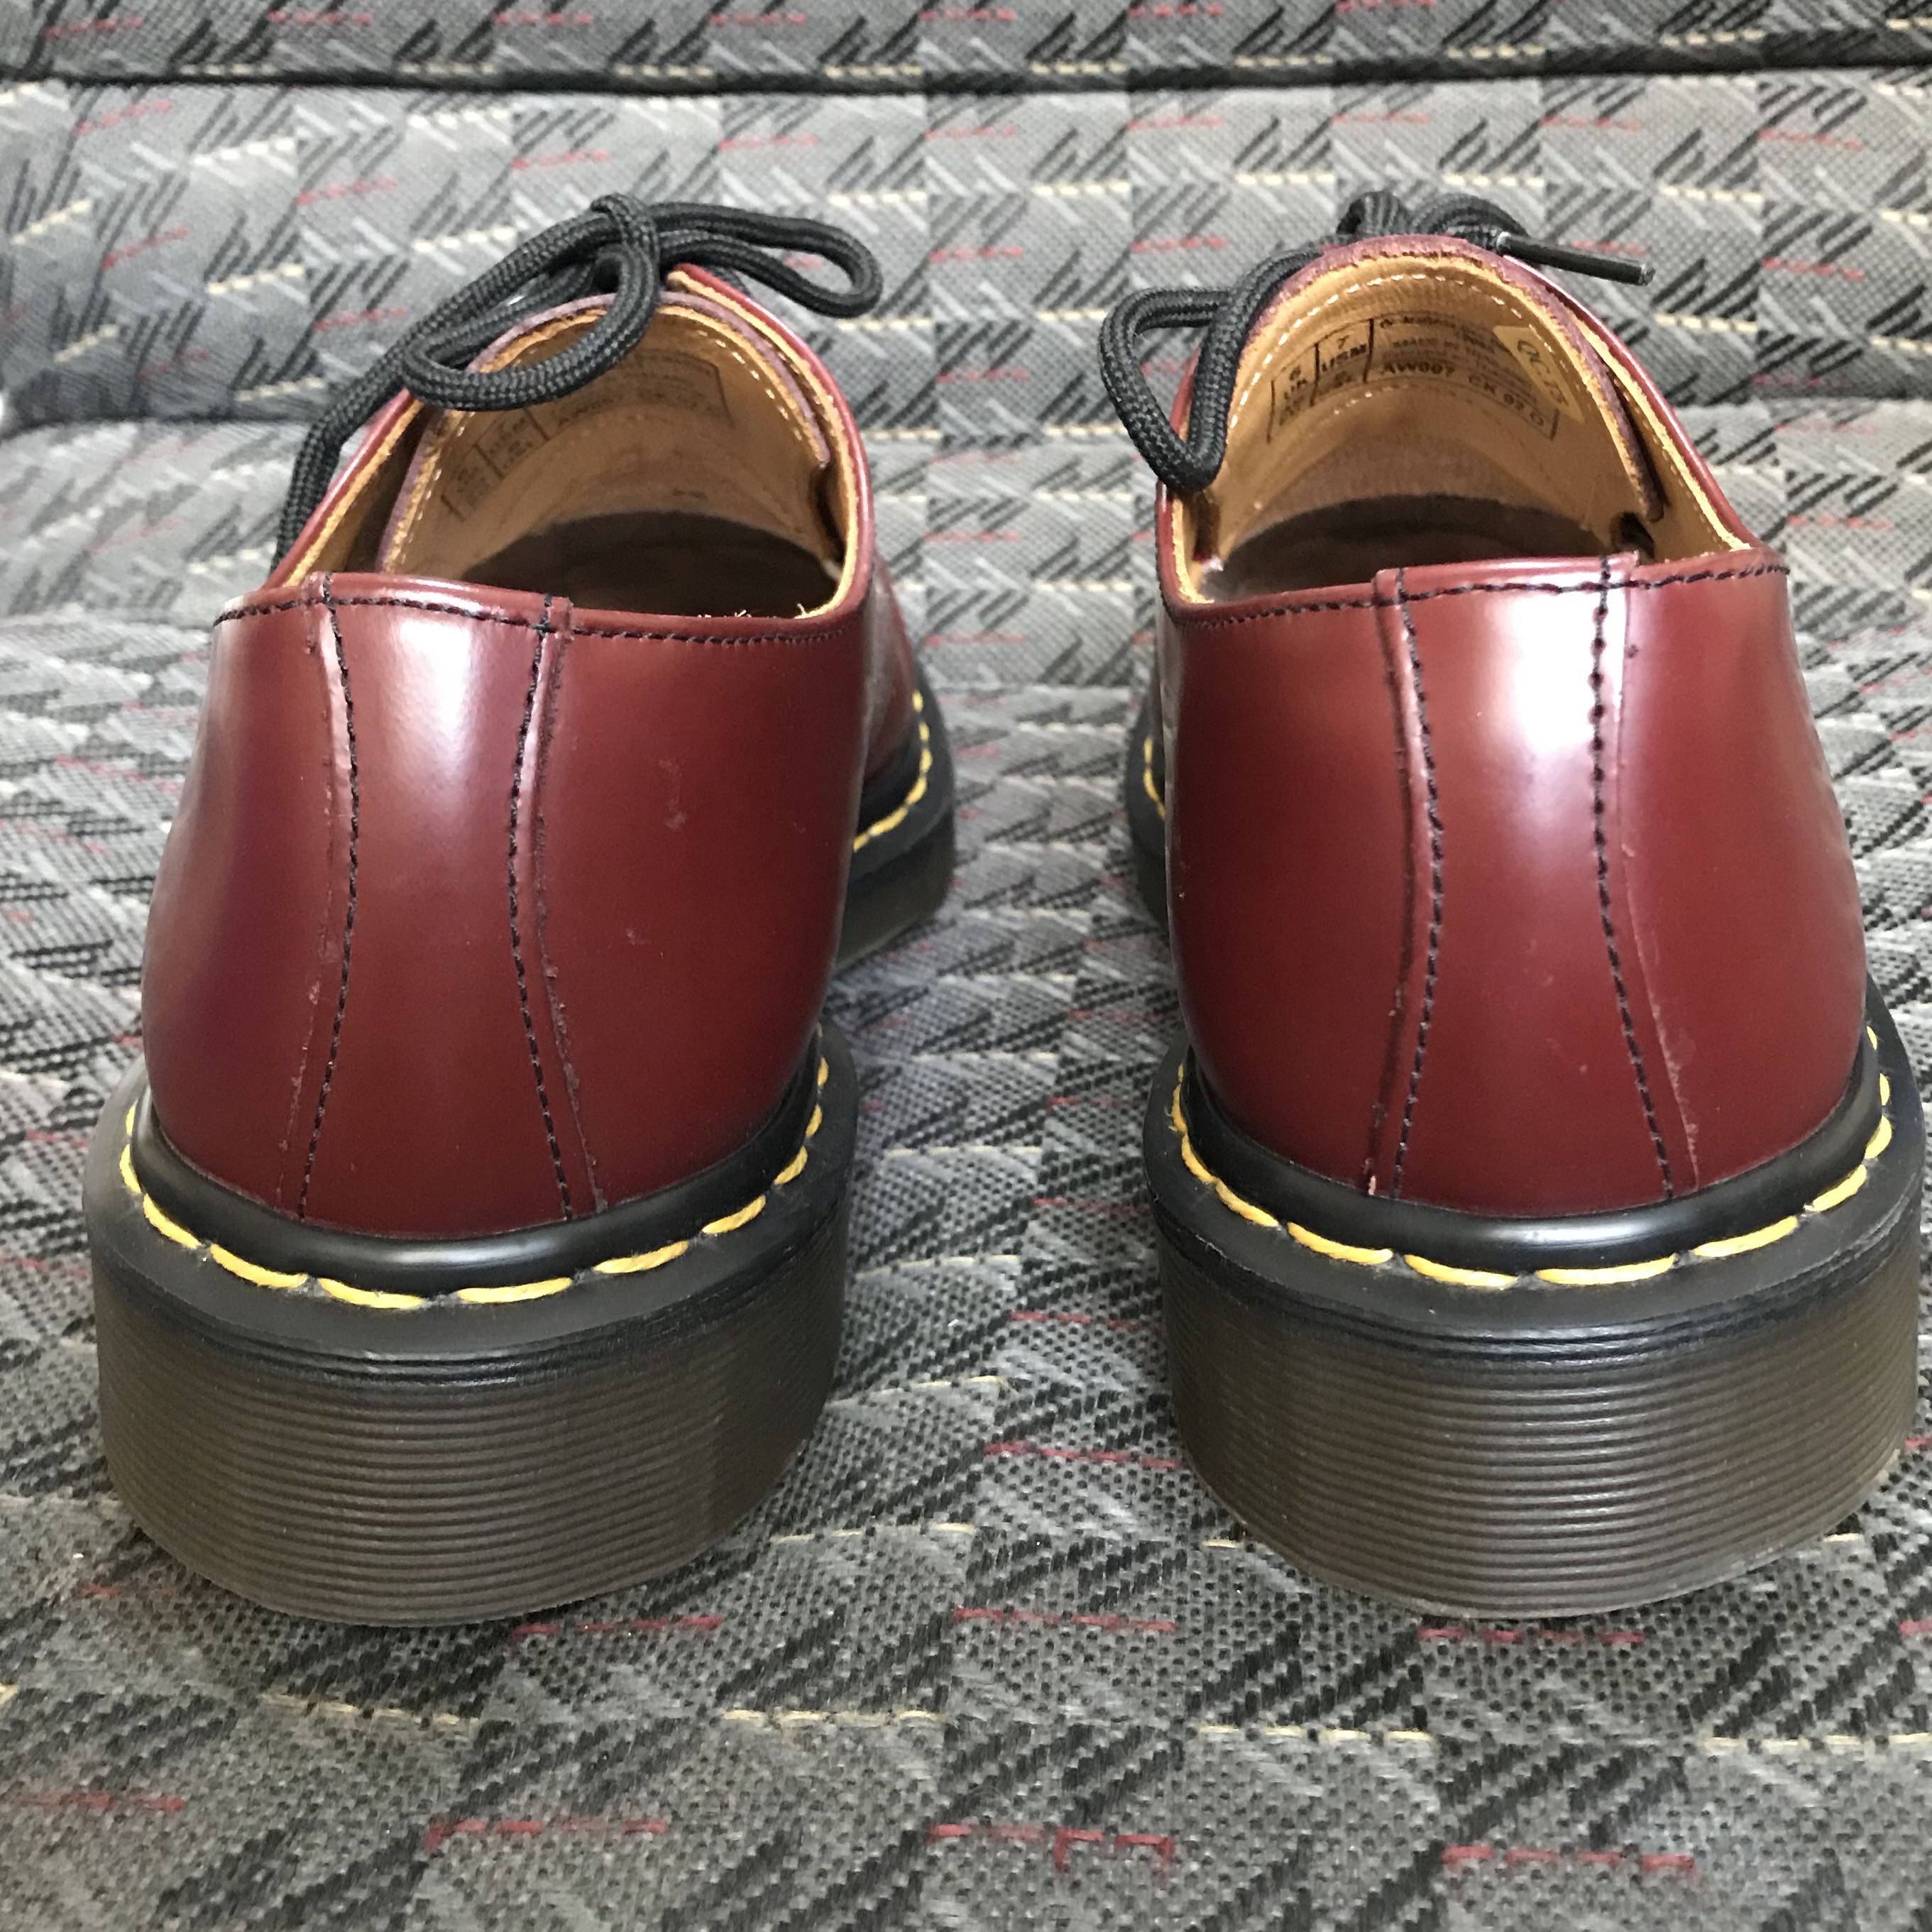 Dr Martens 1641 Cherry Red, Men's Fashion, Footwear, Dress Shoes on ...